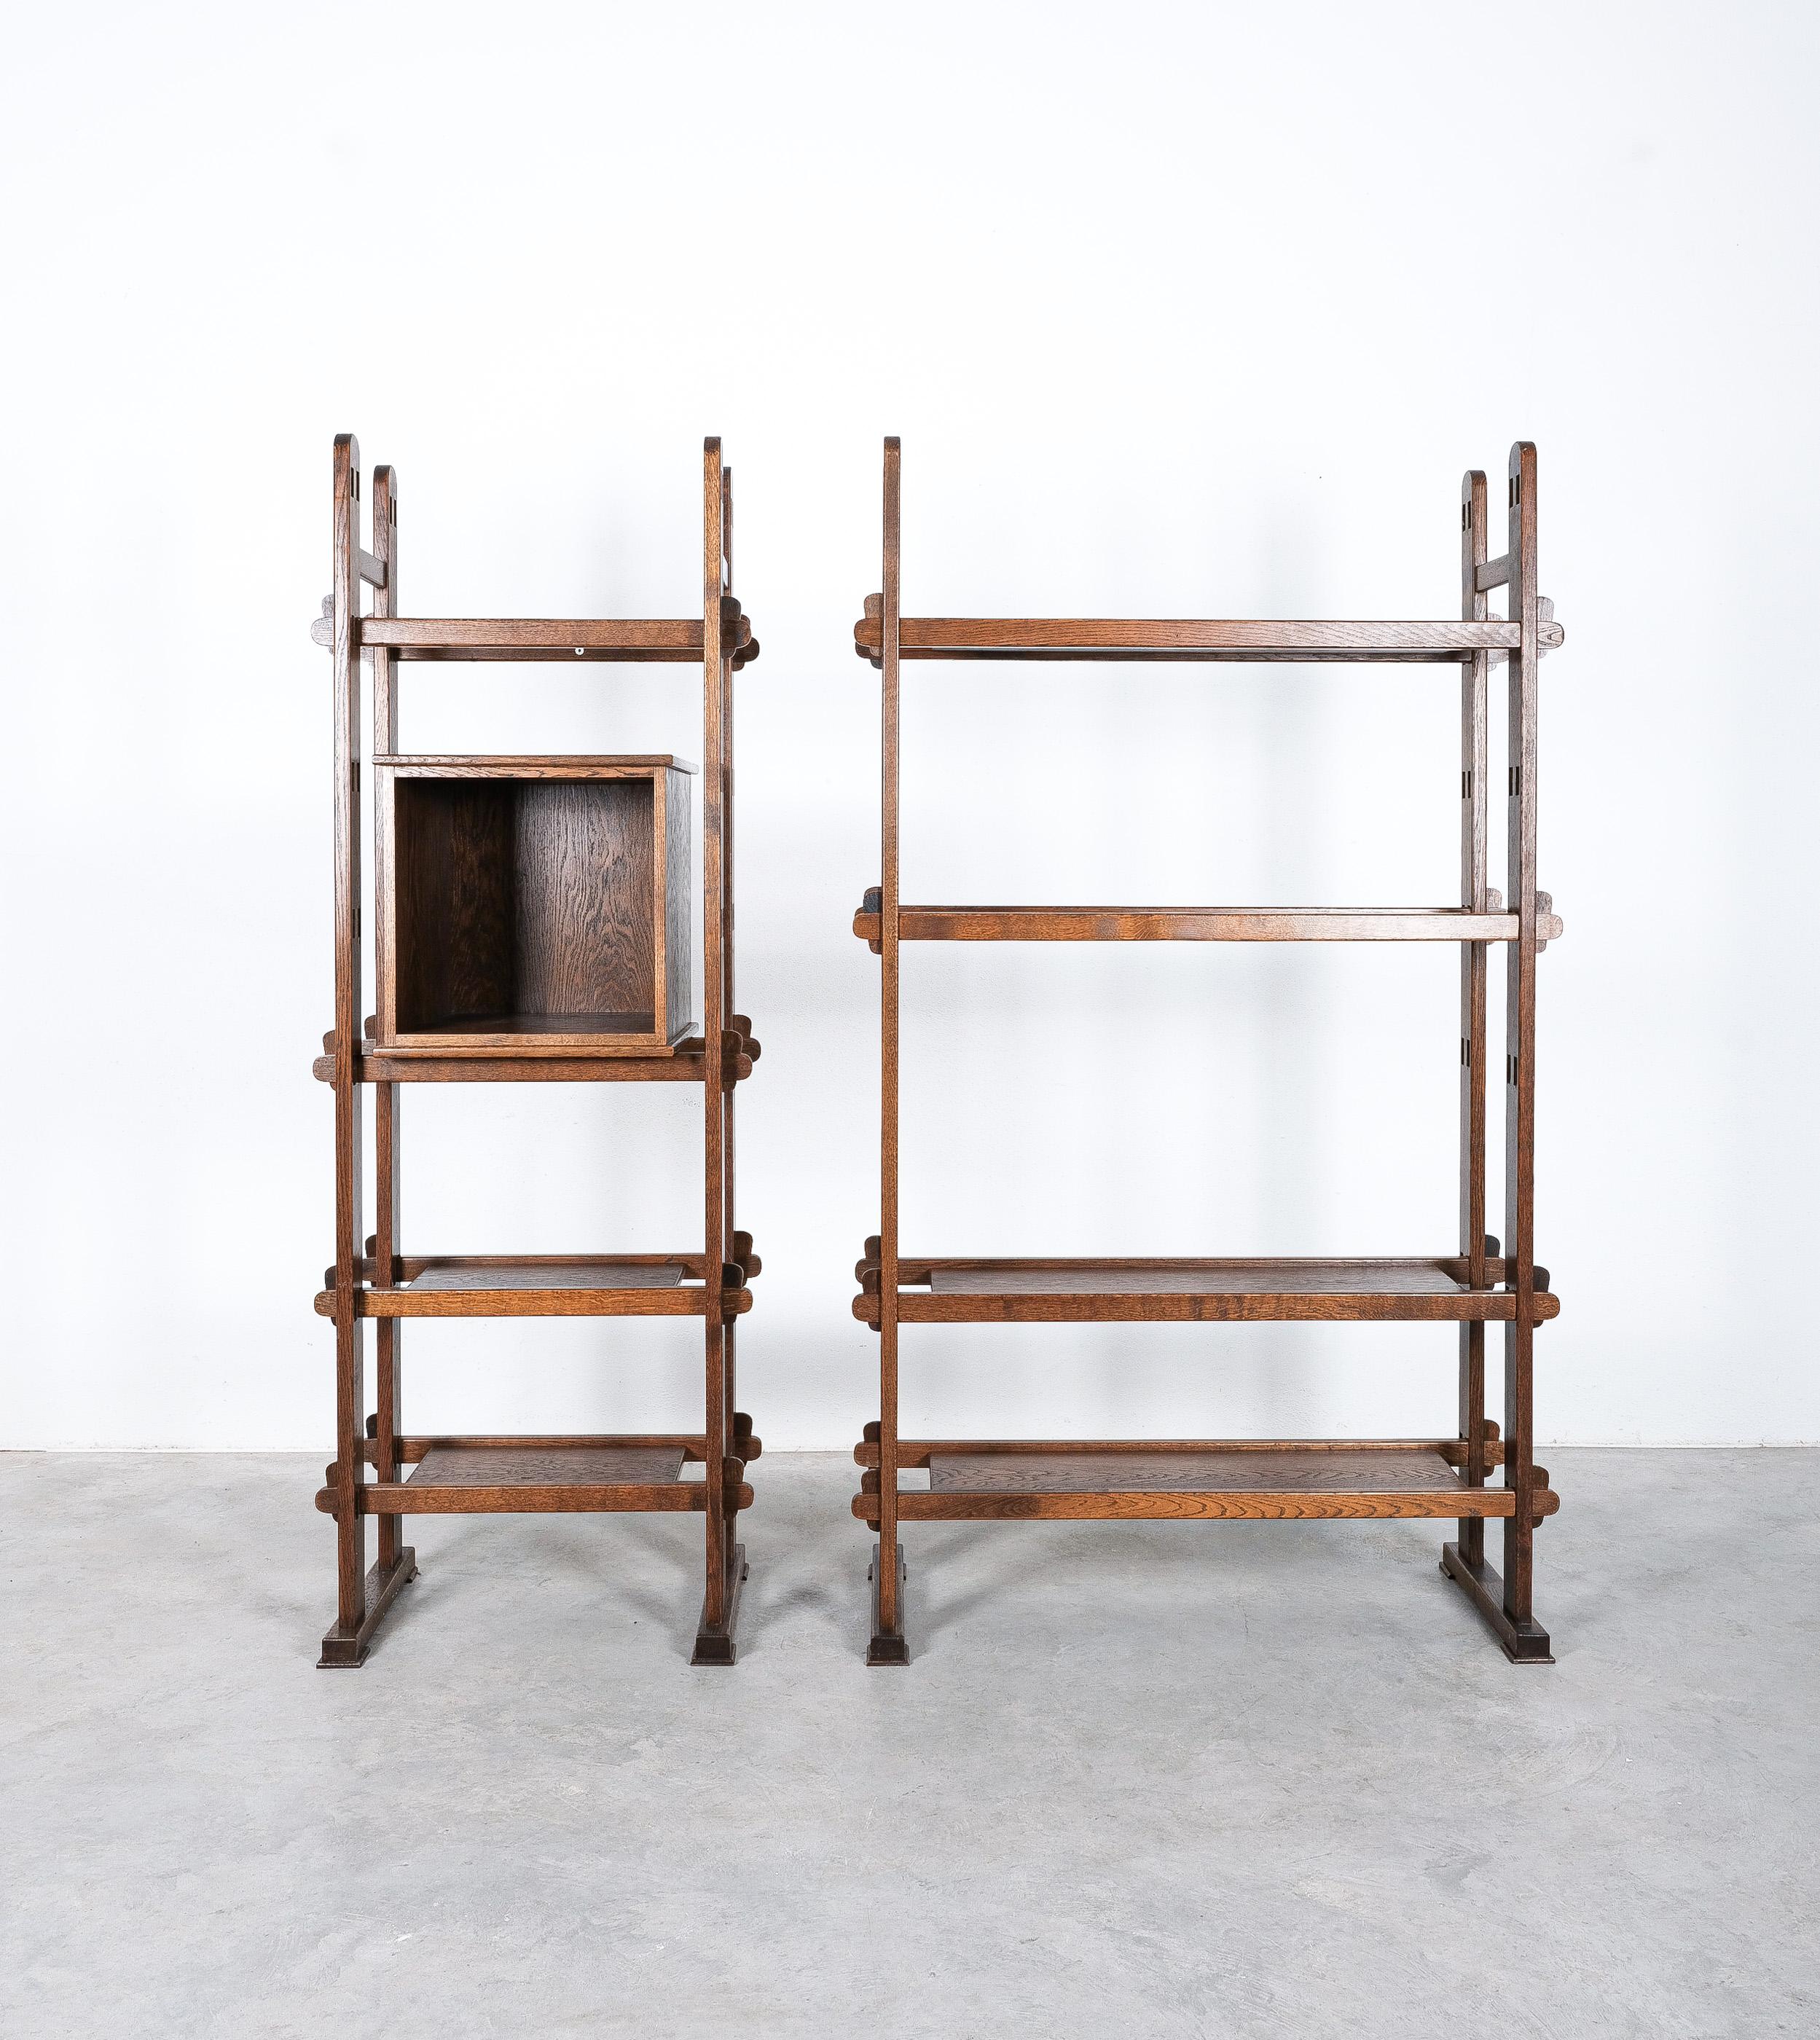 Unique shelf system or bookcase from France, midcentury.

This is an ingenious never seen before self-bearing plug-in shelf-system made from solid oak (except for the box which was later added to the ensemble.)
It's so perfectly handmade that it